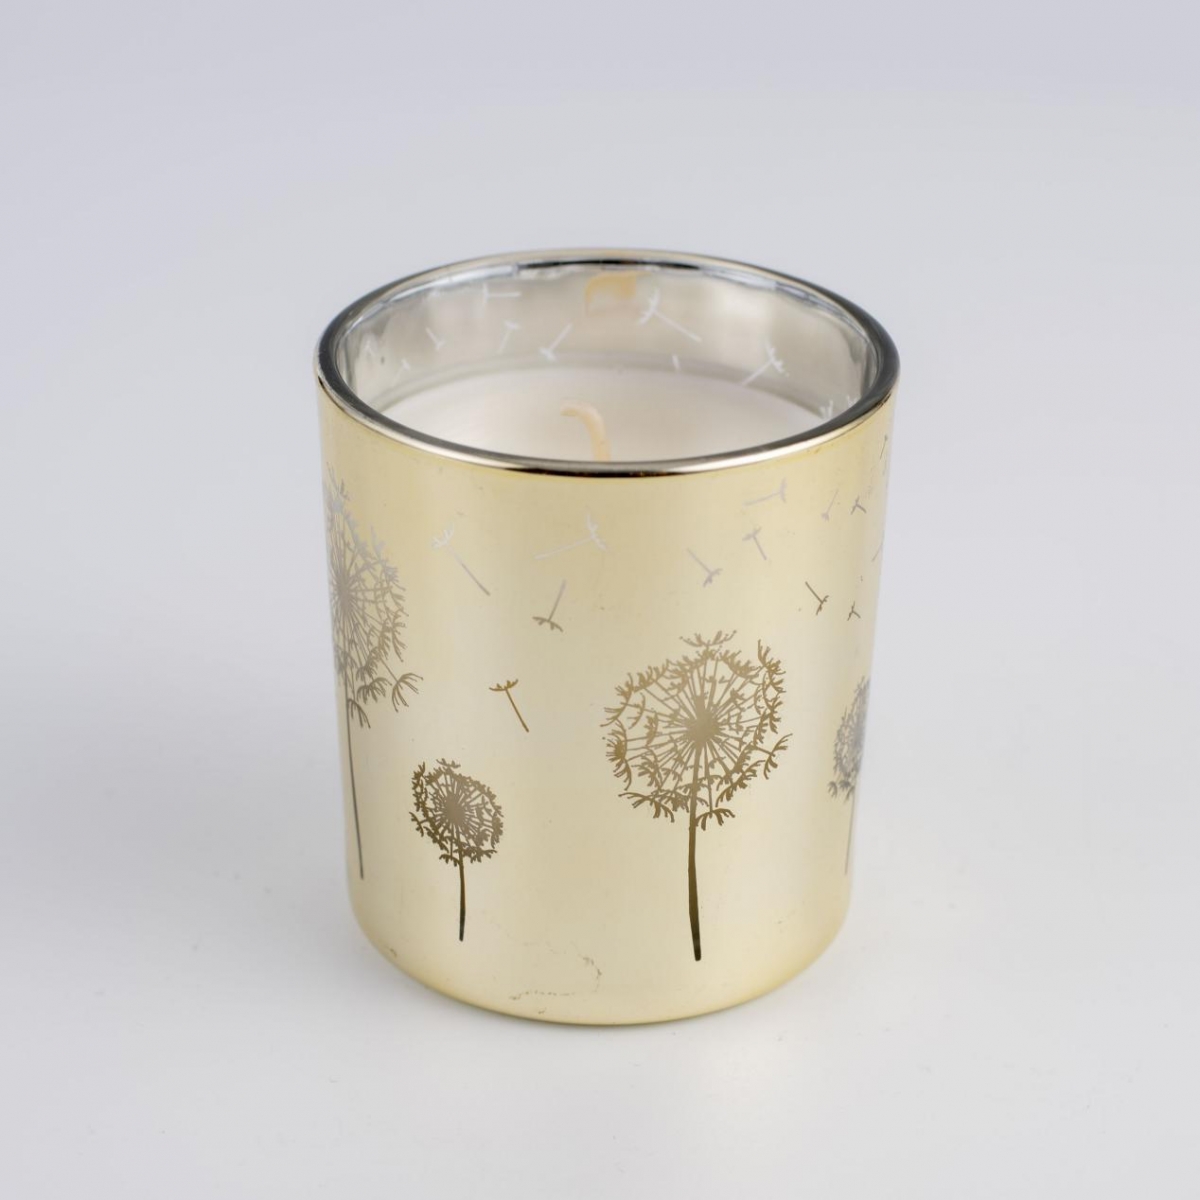 Vegan Candles :  Dandelion ,Engraving On Glass, Gold Candles, China Factory ,Best Price-HOWCANDLE-Candles,Scented Candles,Aromatherapy Candles,Soy Candles,Vegan Candles,Jar Candles,Pillar Candles,Candle Gift Sets,Essential Oils,Reed Diffuser,Candle Holder,